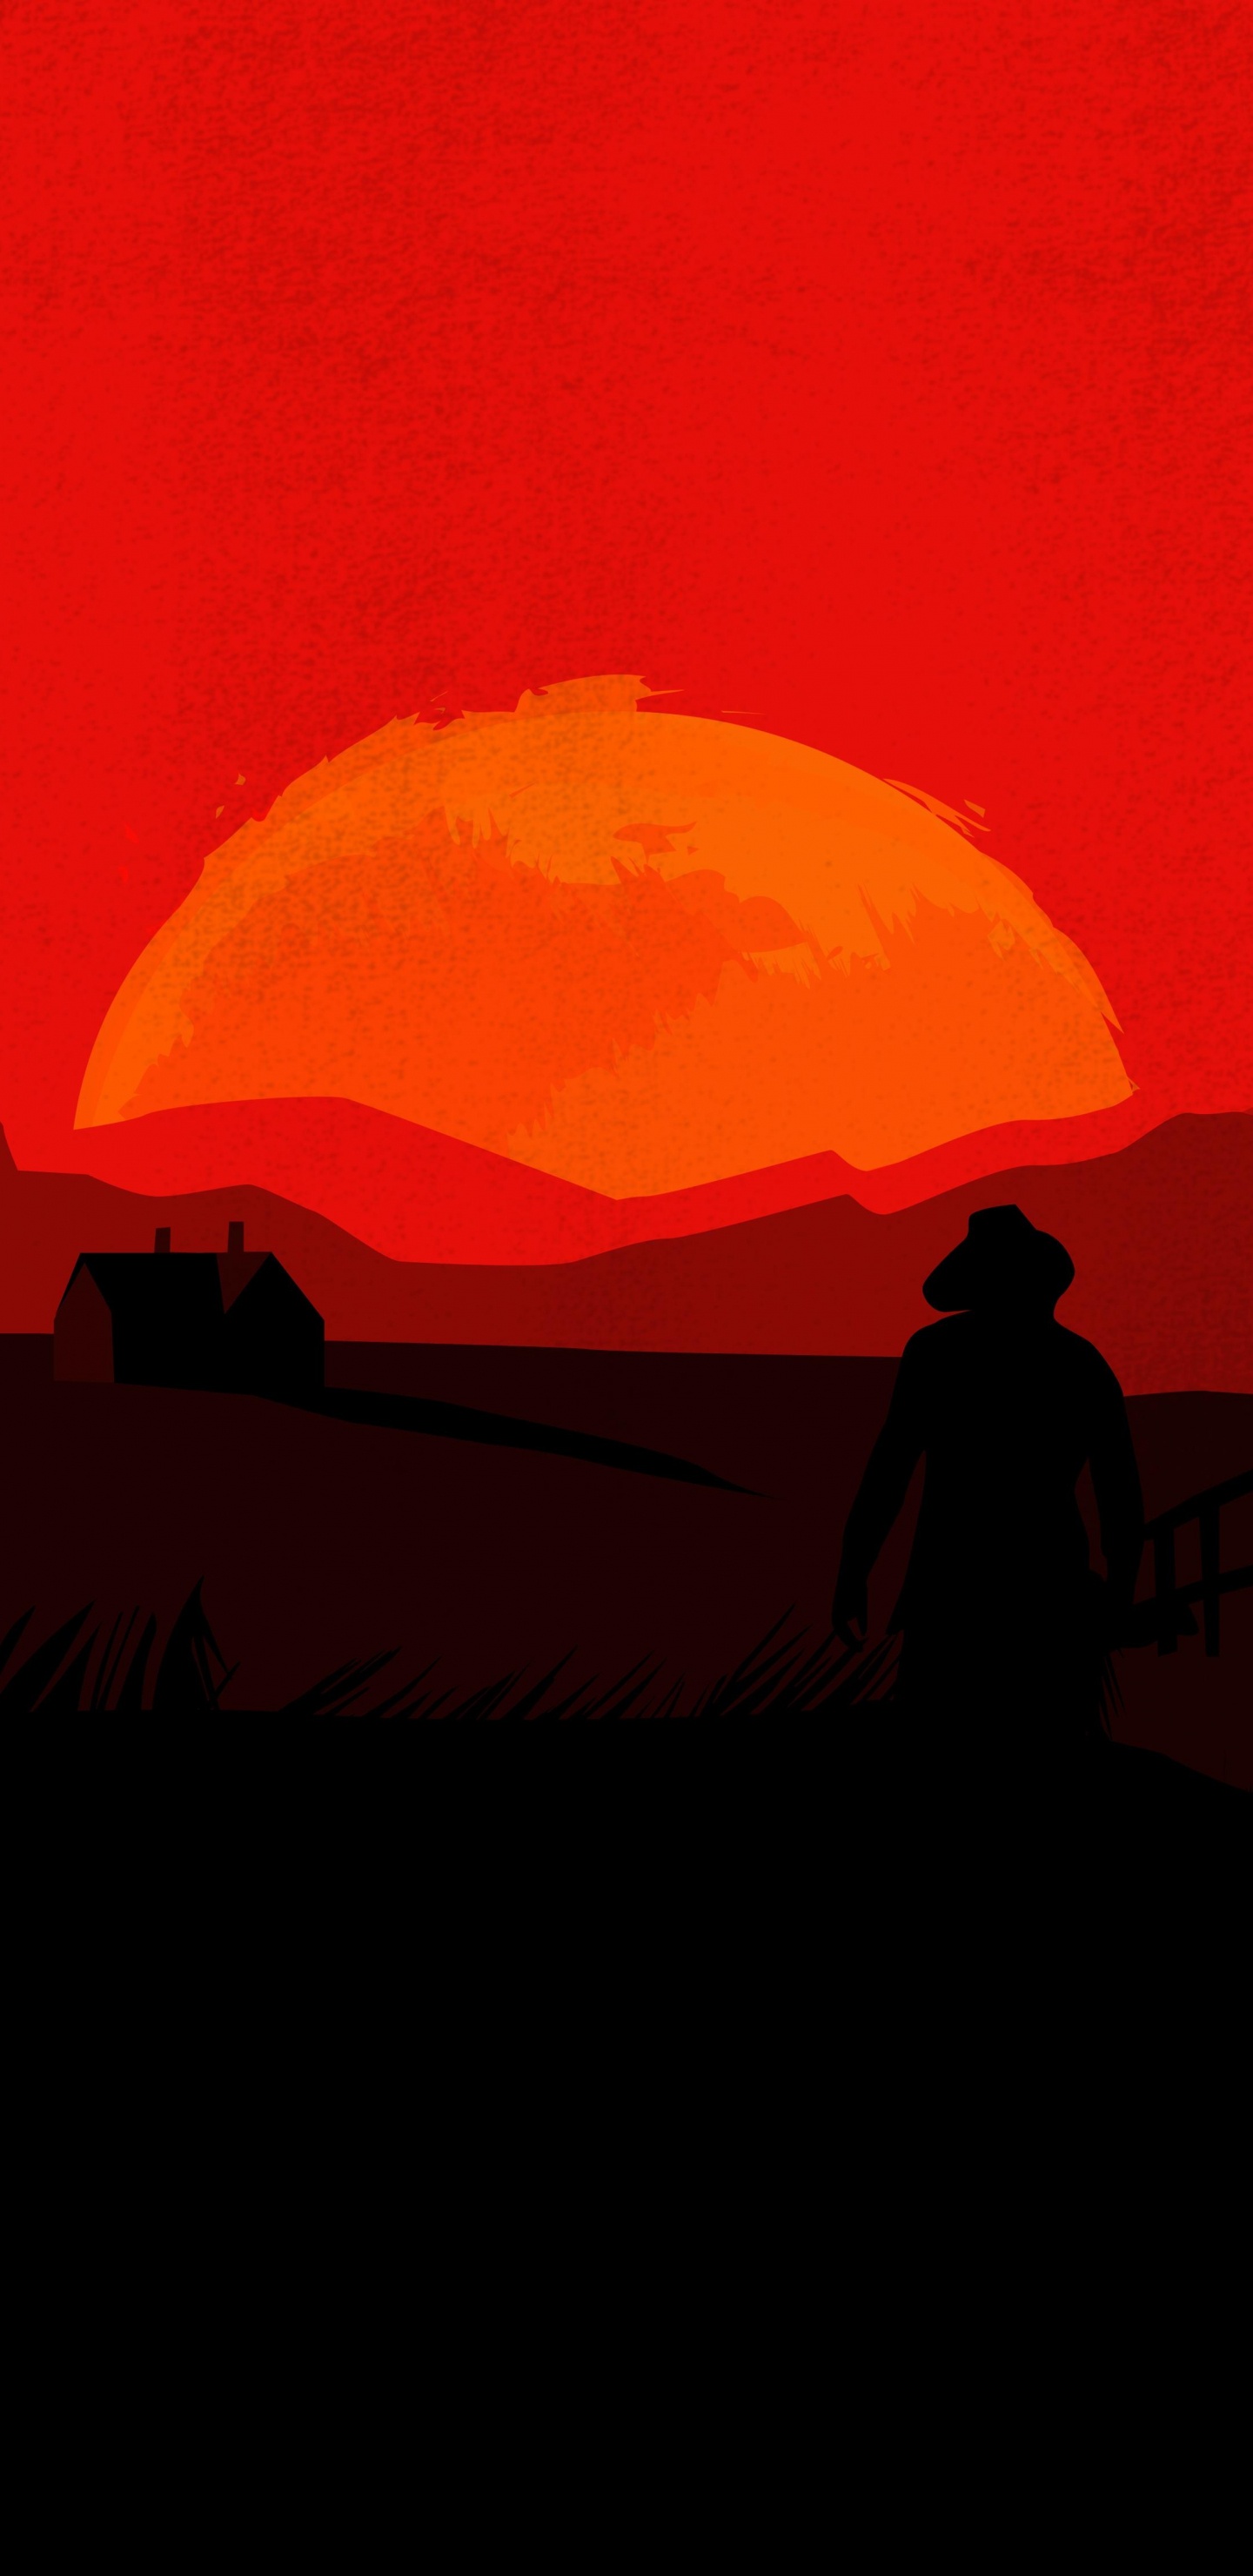 Red Dead Redemption 2, Red Dead Redemption, Red, Afterglow, Lever. Wallpaper in 1440x2960 Resolution